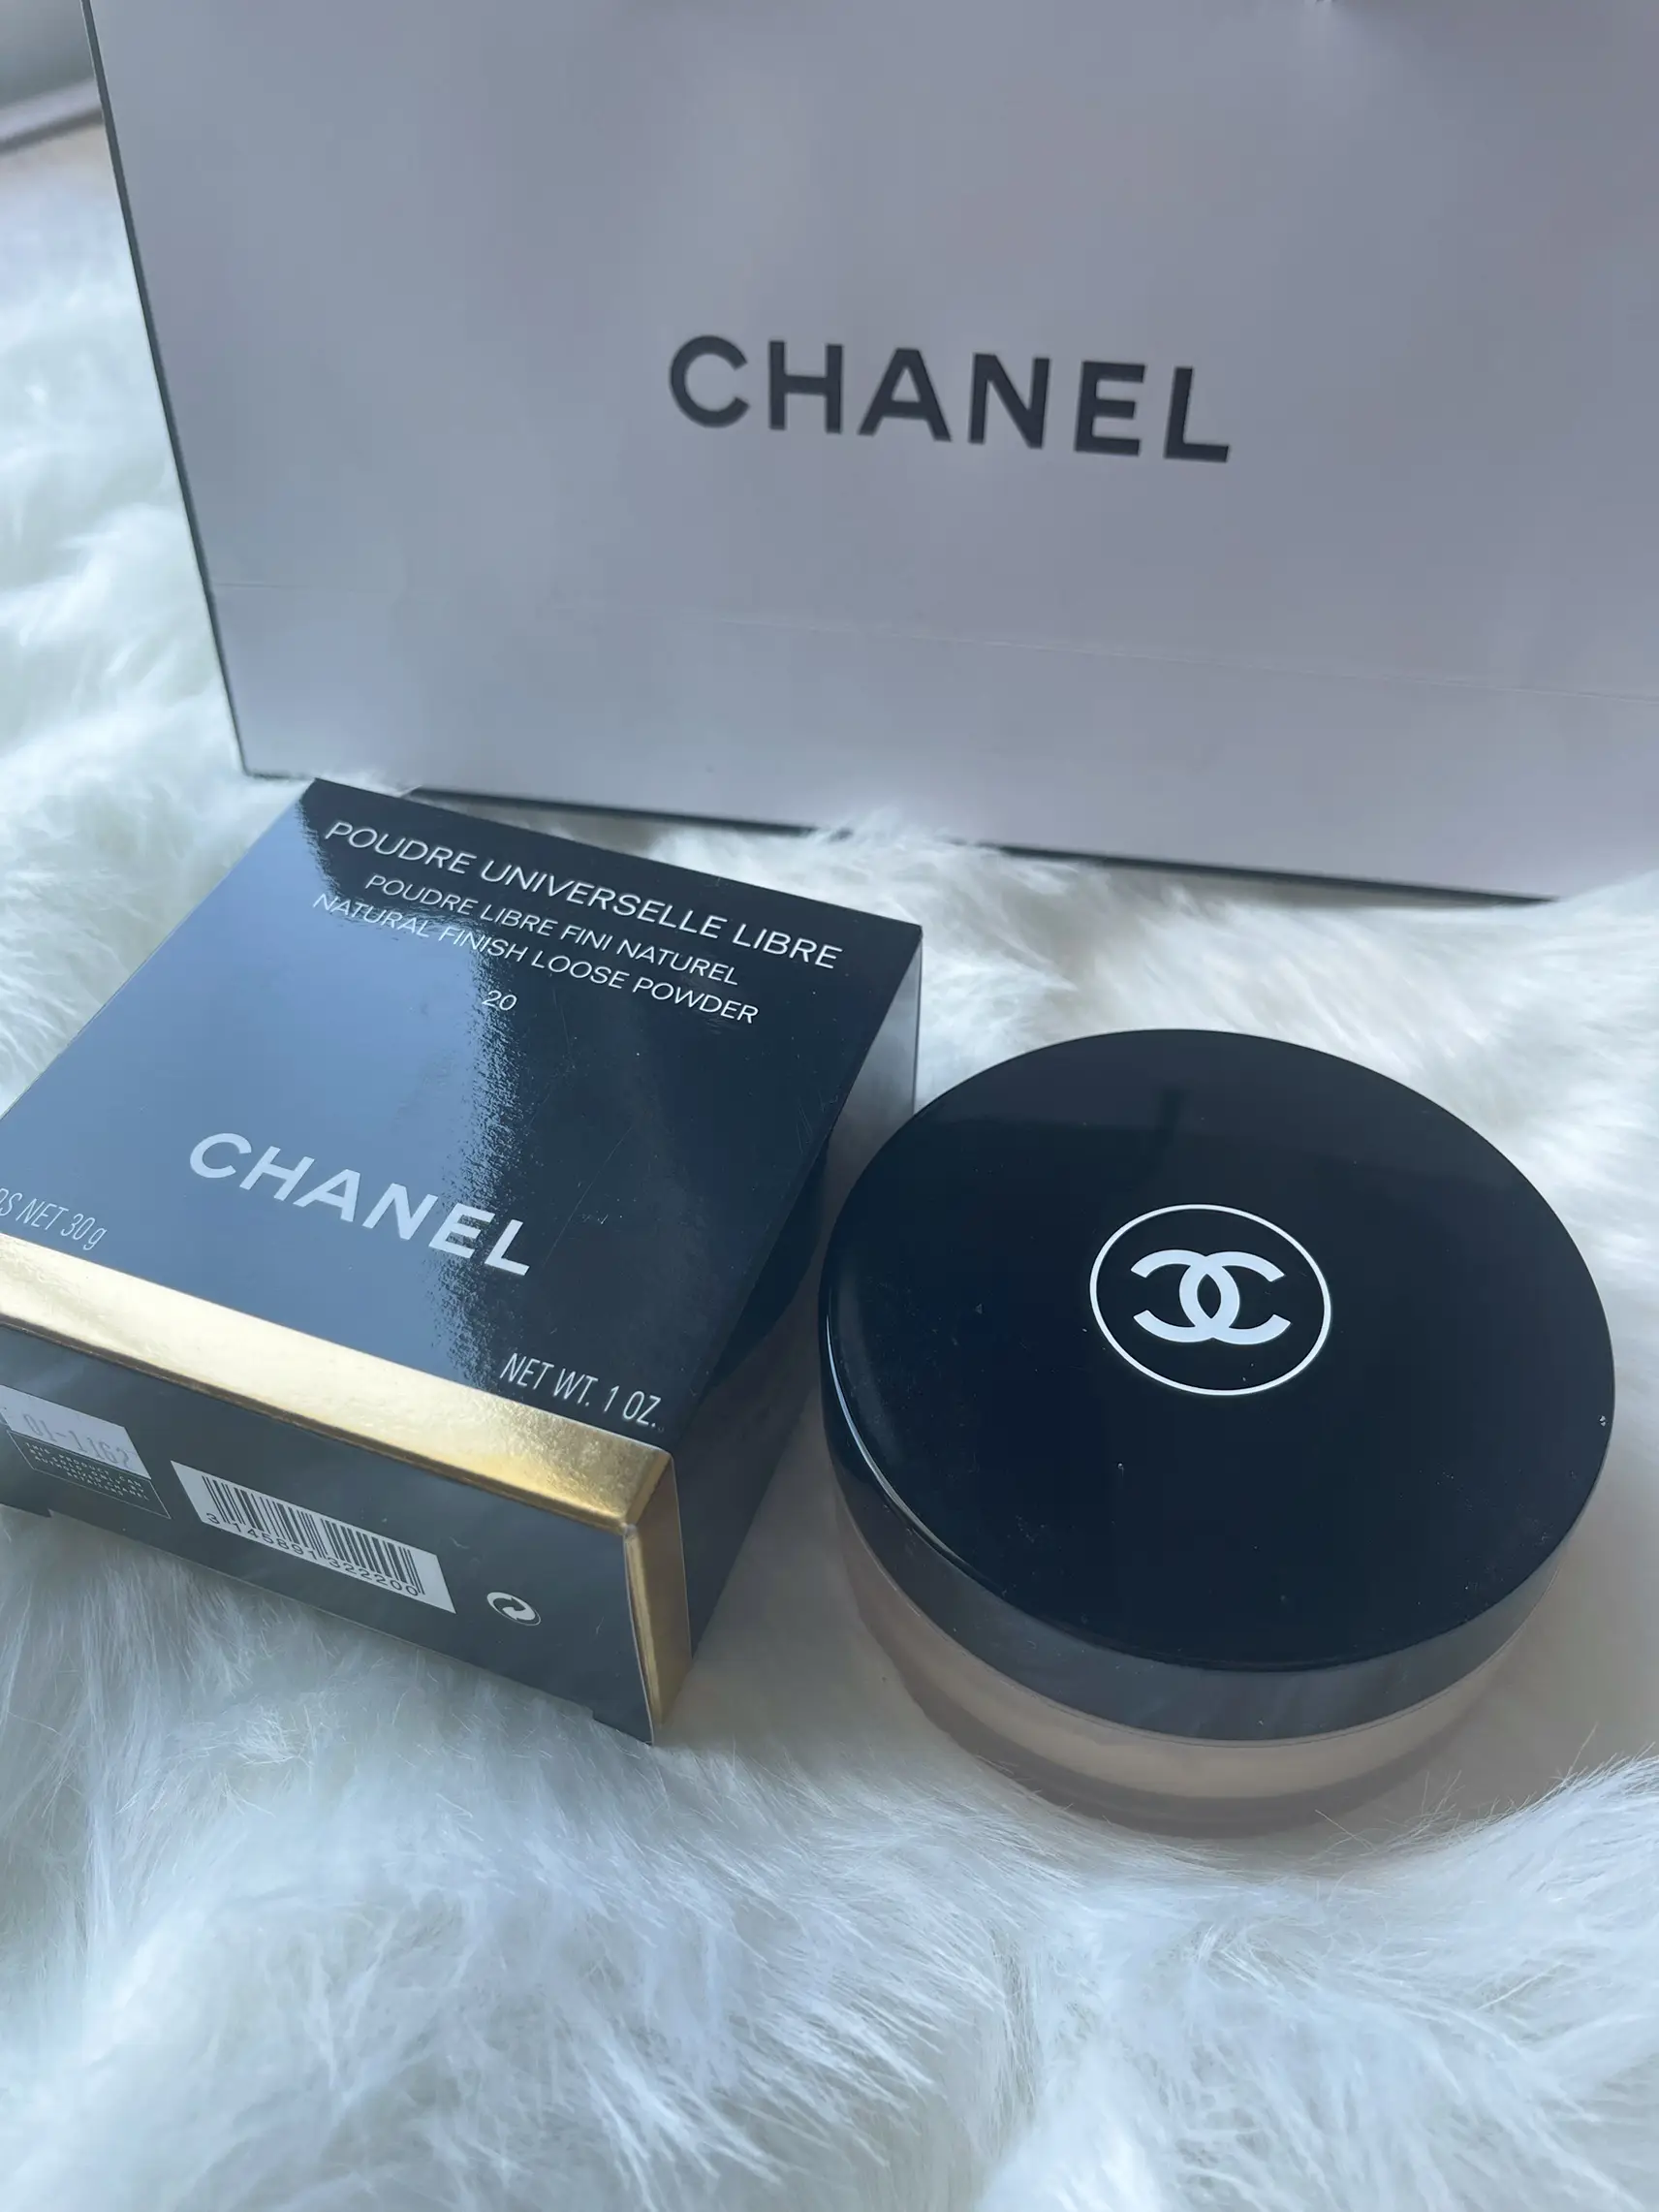 30 g. Chanel Poudre Universelle Libre Natural Finish Loose Powder (Shade 20)